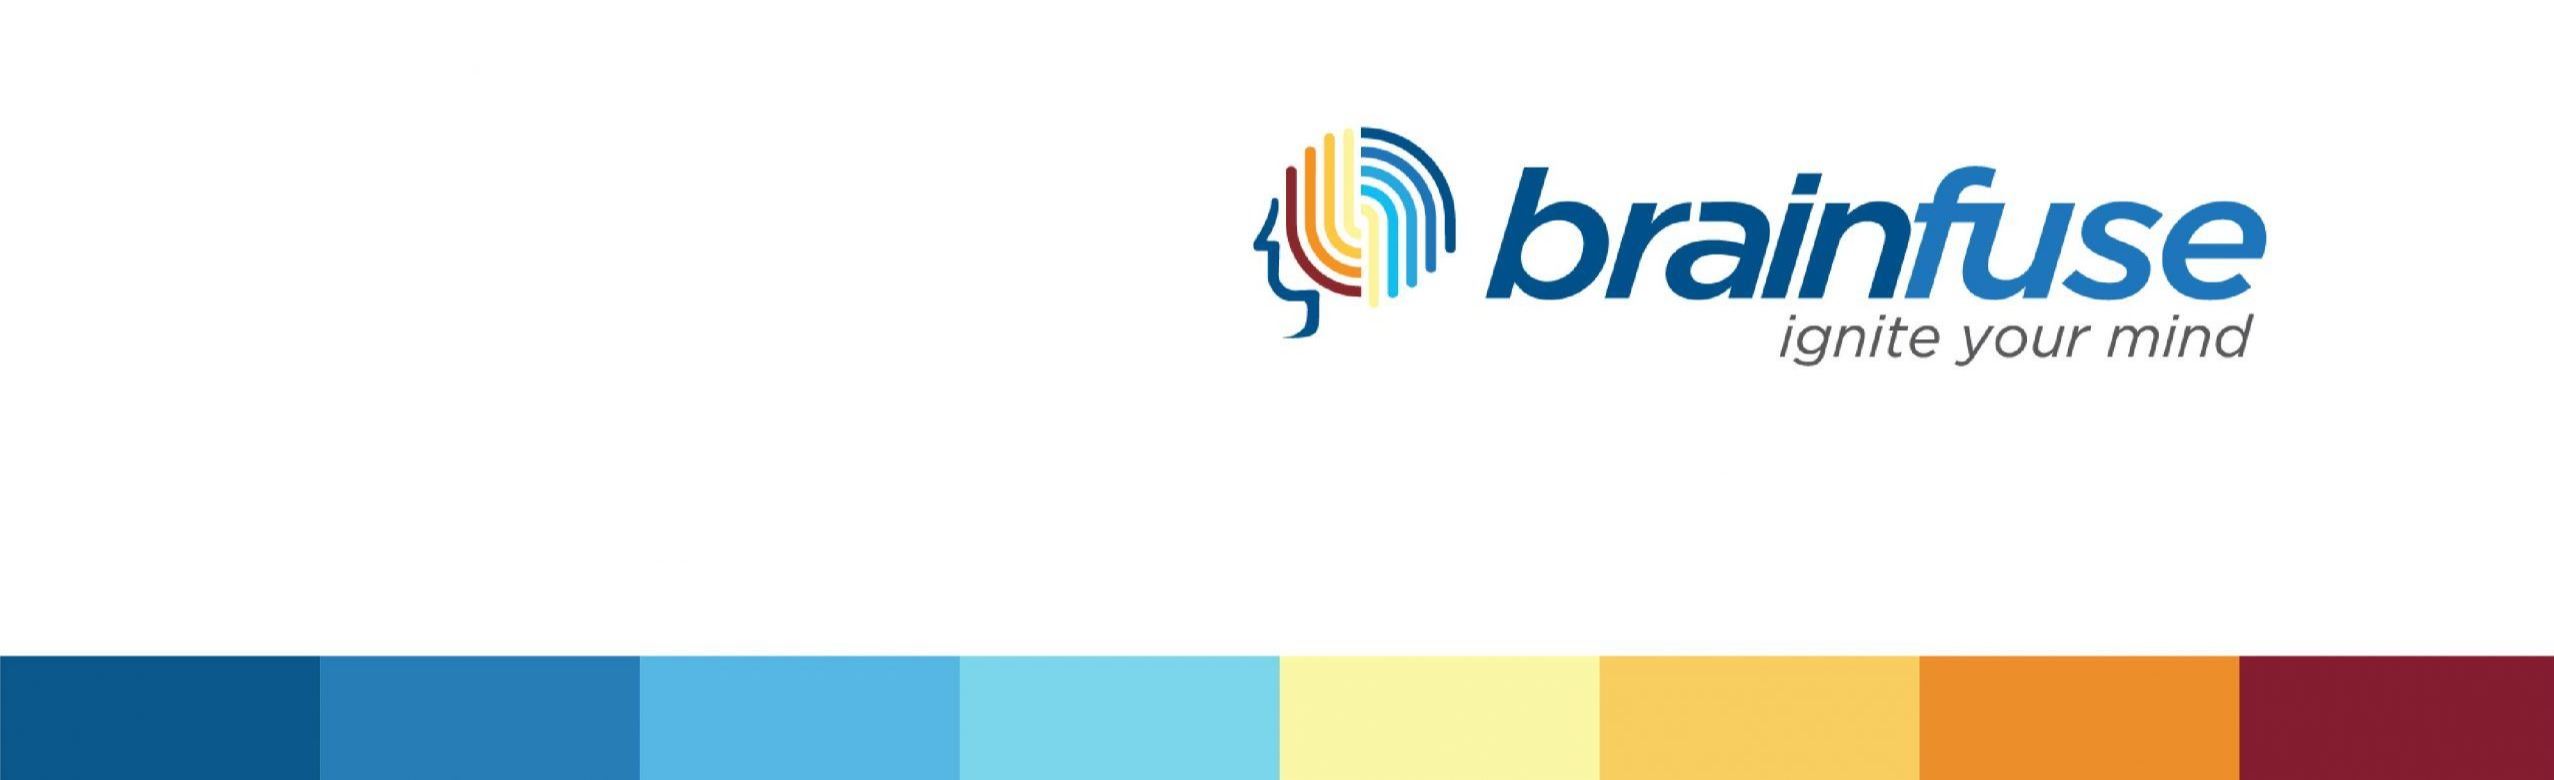 Brainfuse logo with a white background